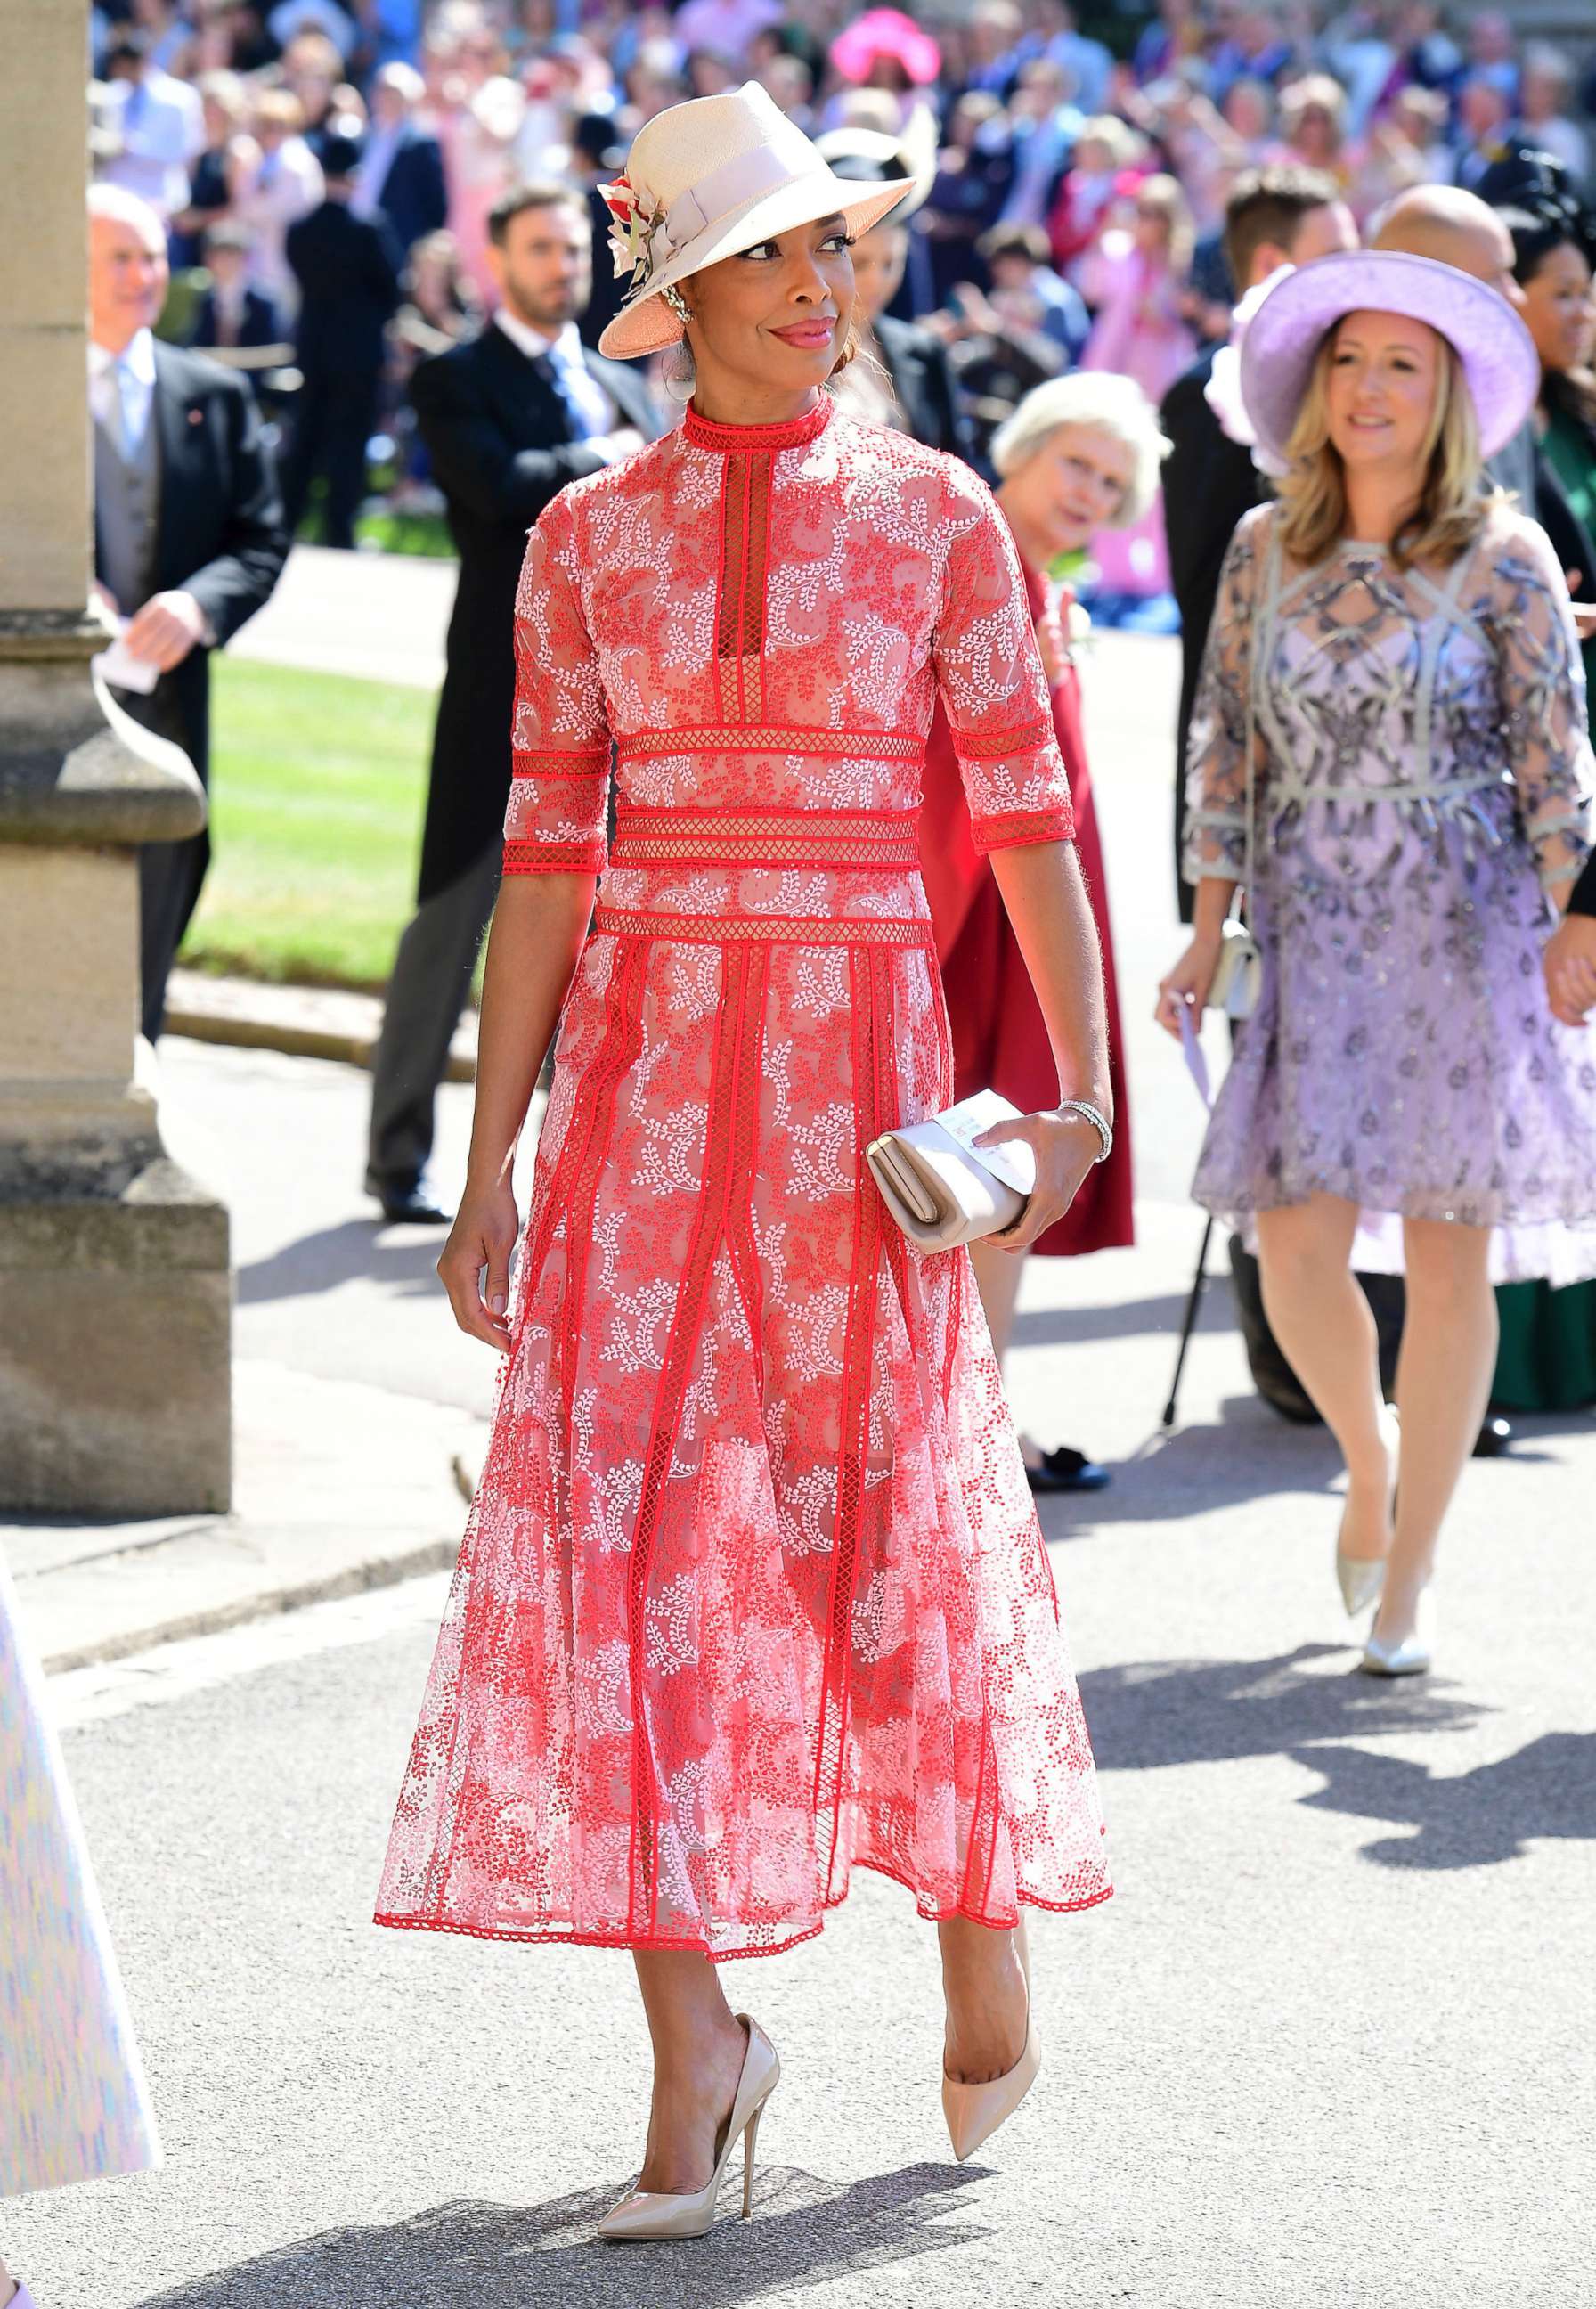 PHOTO: Gina Torres arrives for the wedding ceremony of Prince Harry and Meghan Markle at St. George's Chapel in Windsor Castle in Windsor, May 19, 2018.